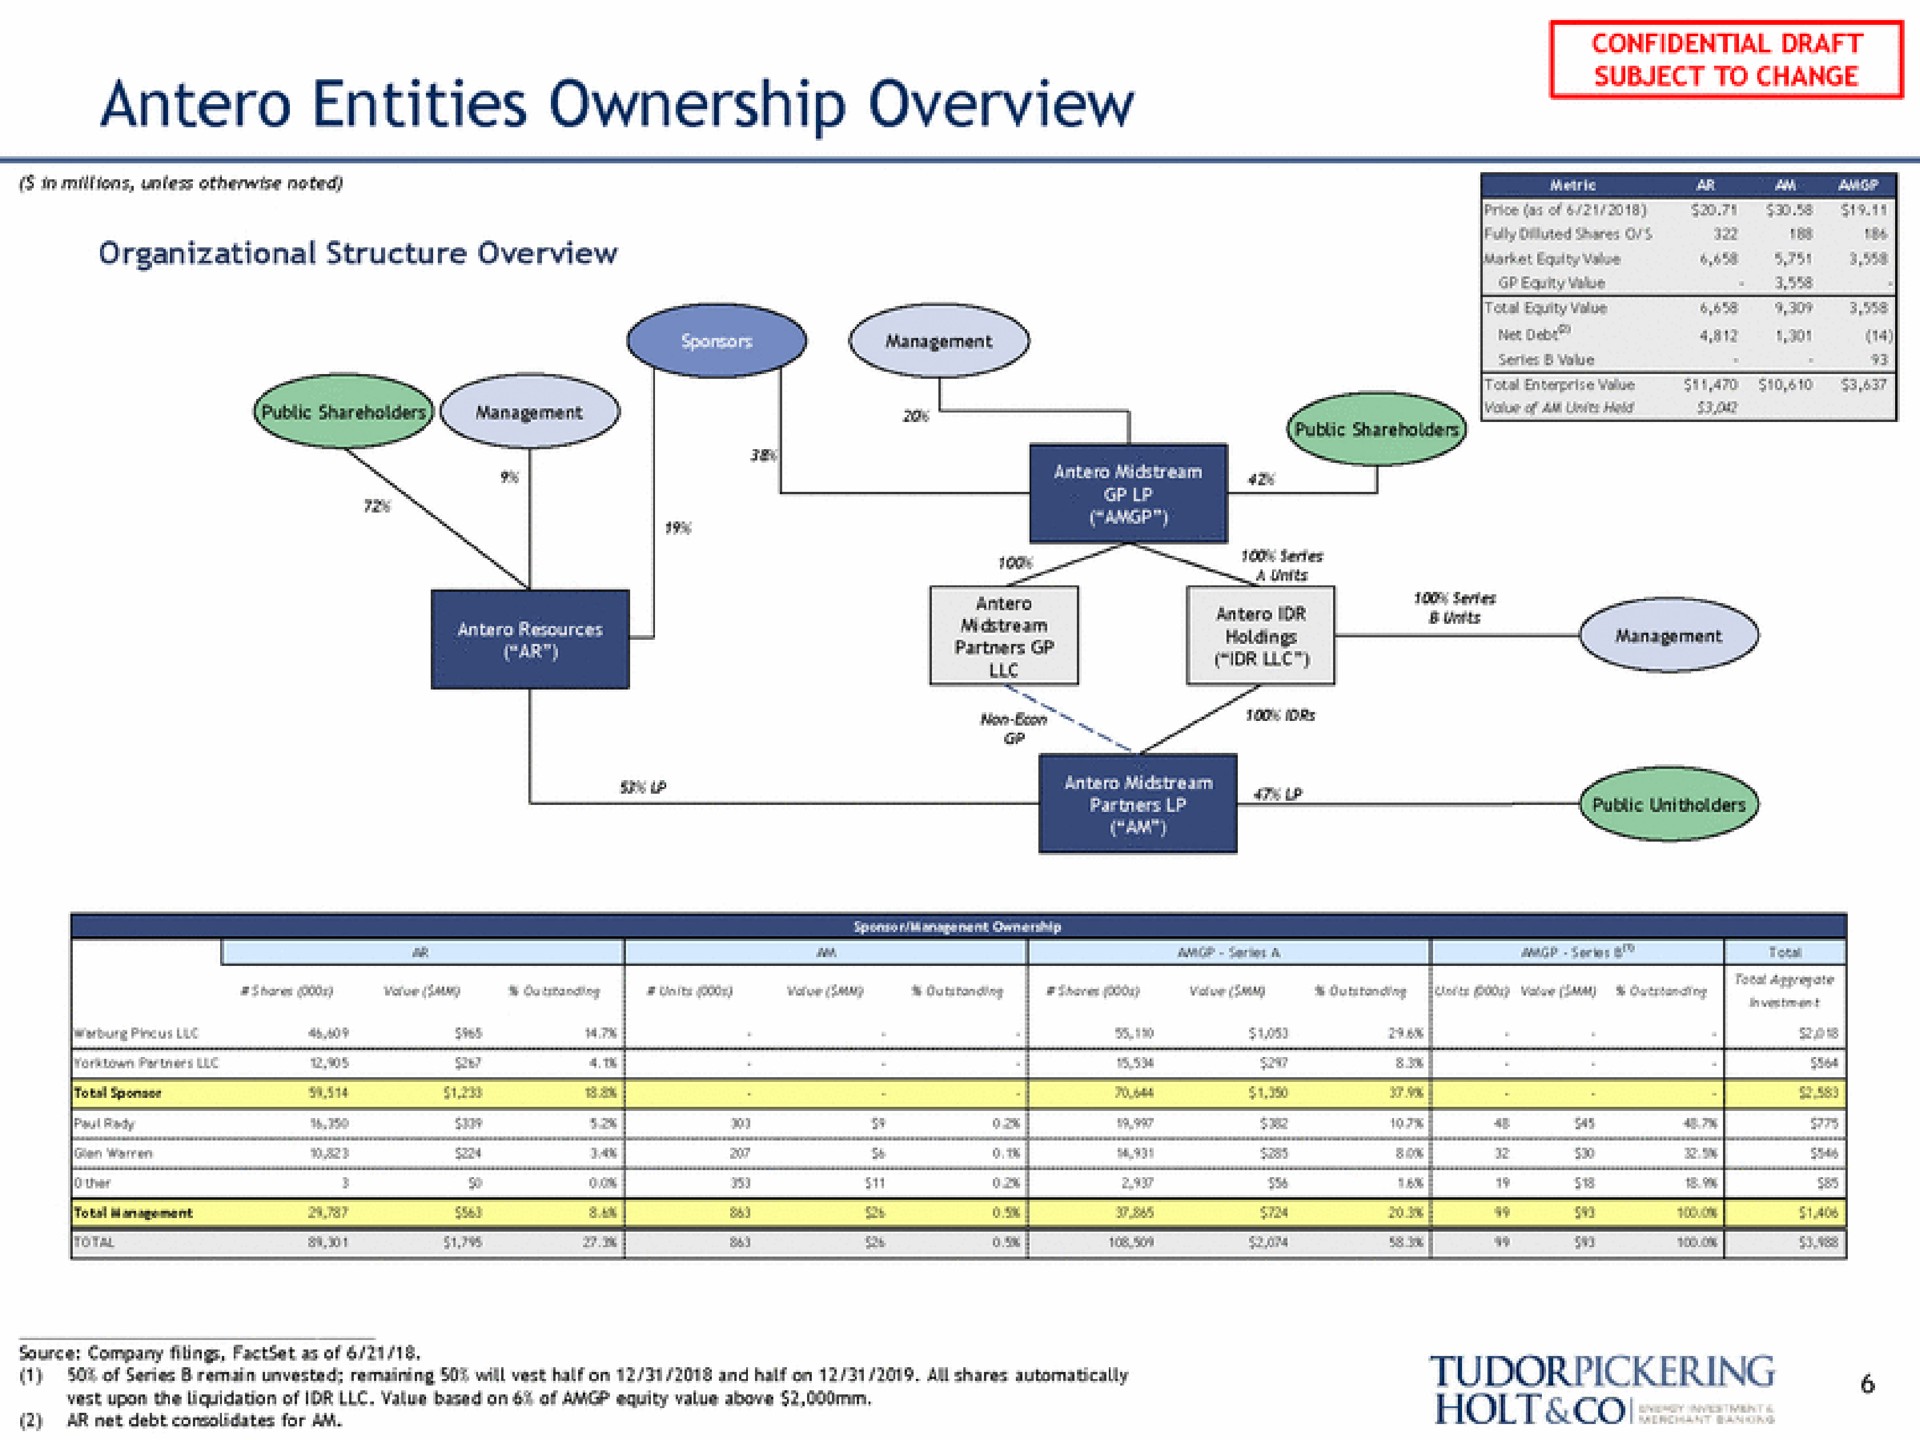 entities ownership overview subject to change i tin seme | Tudor, Pickering, Holt & Co